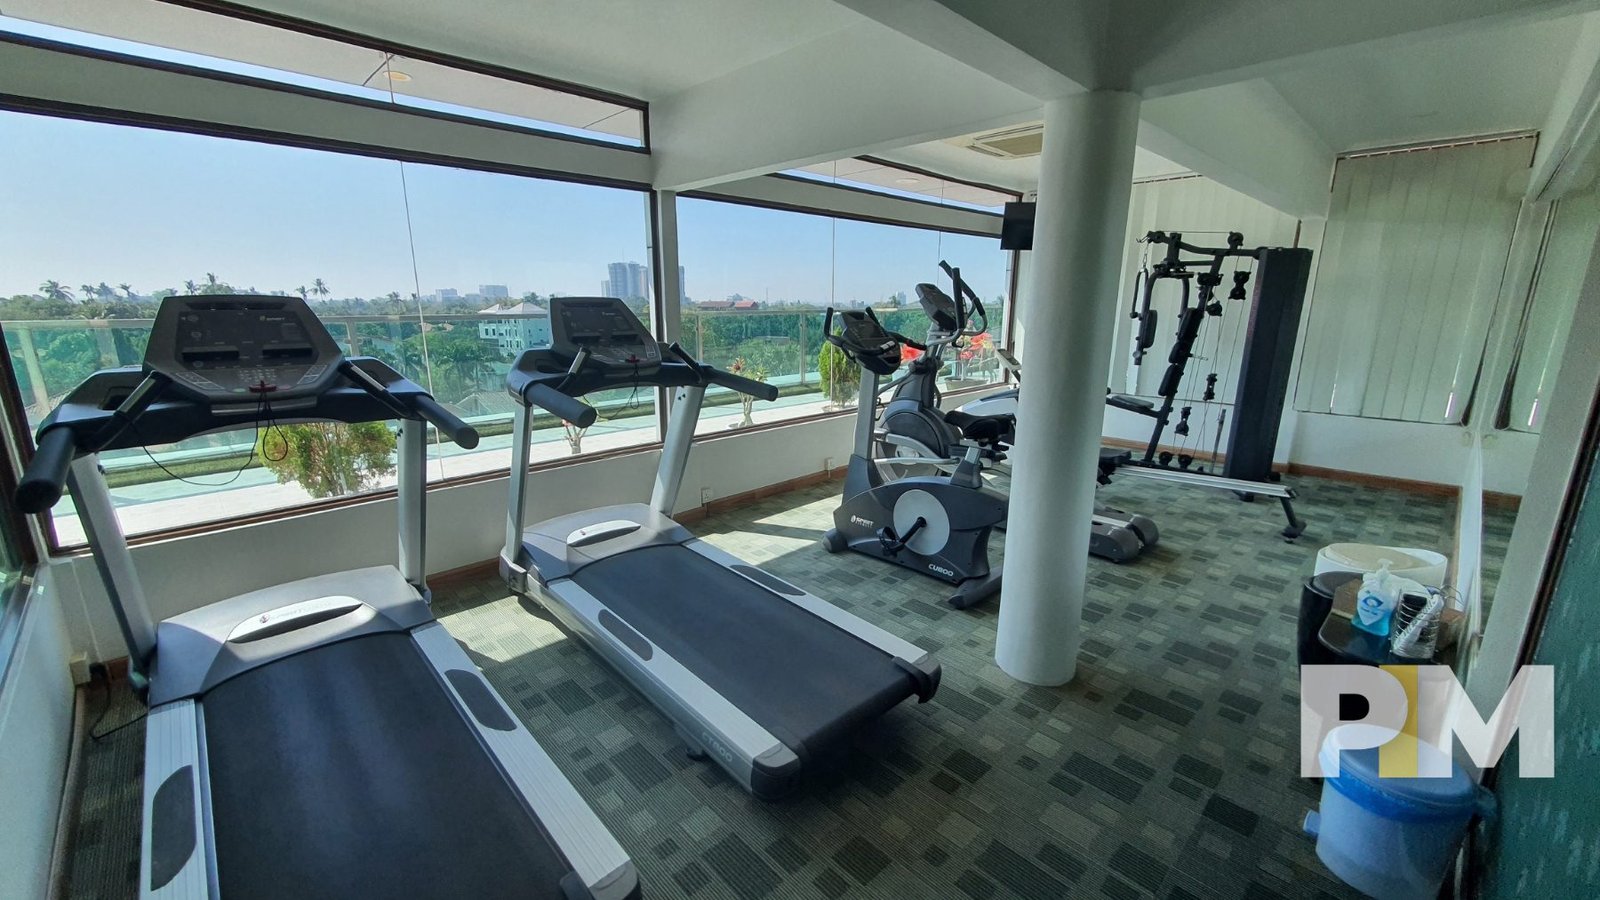 Gym - condo for rent in myanmar